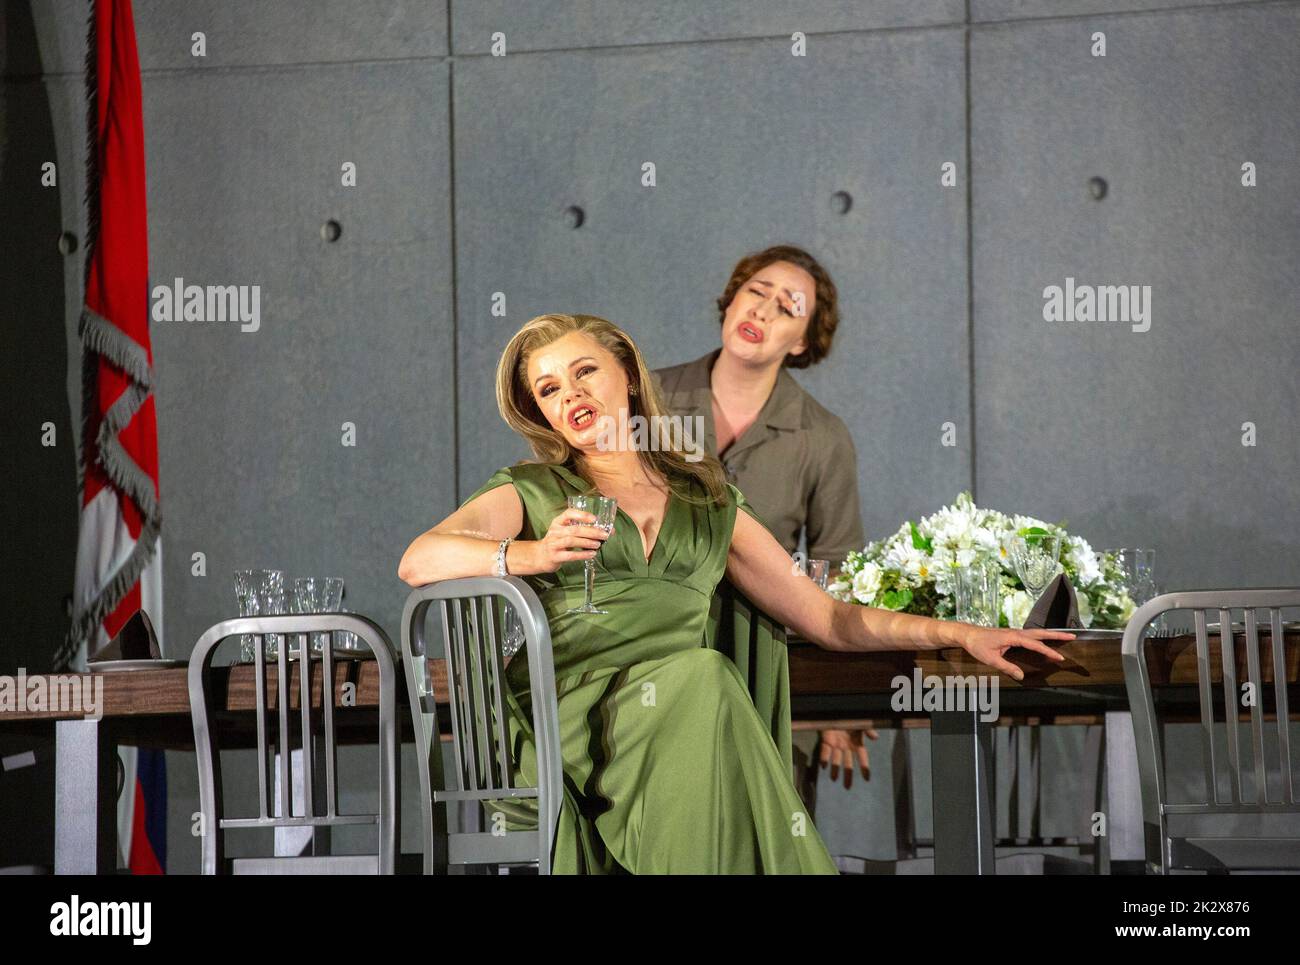 l-r: Agnieszka Rehlis (Amneris), Elena Stikhina (Aida) in a new production of AIDA by Verdi opening at The Royal Opera, Covent Garden, London WC2 on Sunday 25/09/2022  an updated version originally set in Egypt now with overtones or references to war in Europe    conductor: Antonio Pappano  set design: Miriam Buether  costumes: Annemarie Woods  lighting: Robert Carsen & Peter van Praet  video design: Duncan McLean  choreographer: Rebecca Howell  director: Robert Carsen Stock Photo